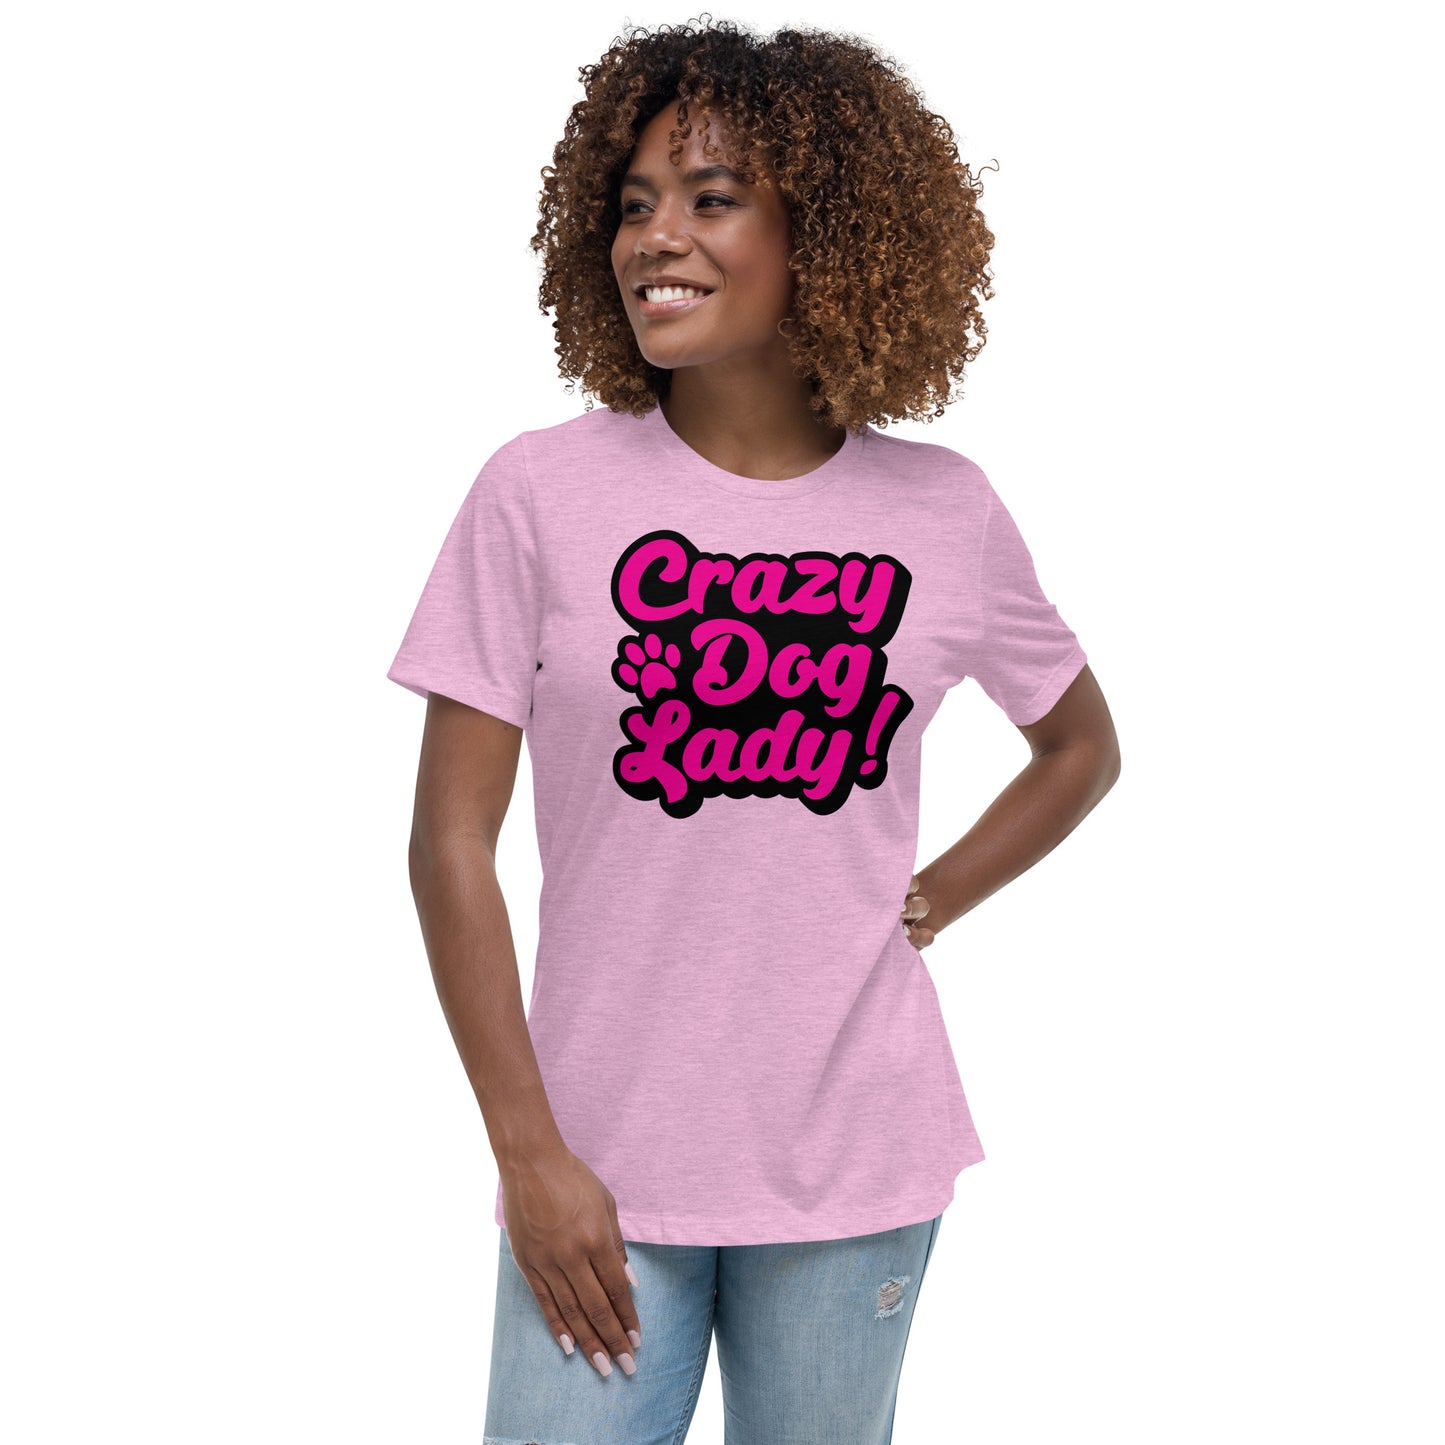 Crazy Dog Lady Women's Heather Prism Lilac T-Shirt by Dog Artistry 